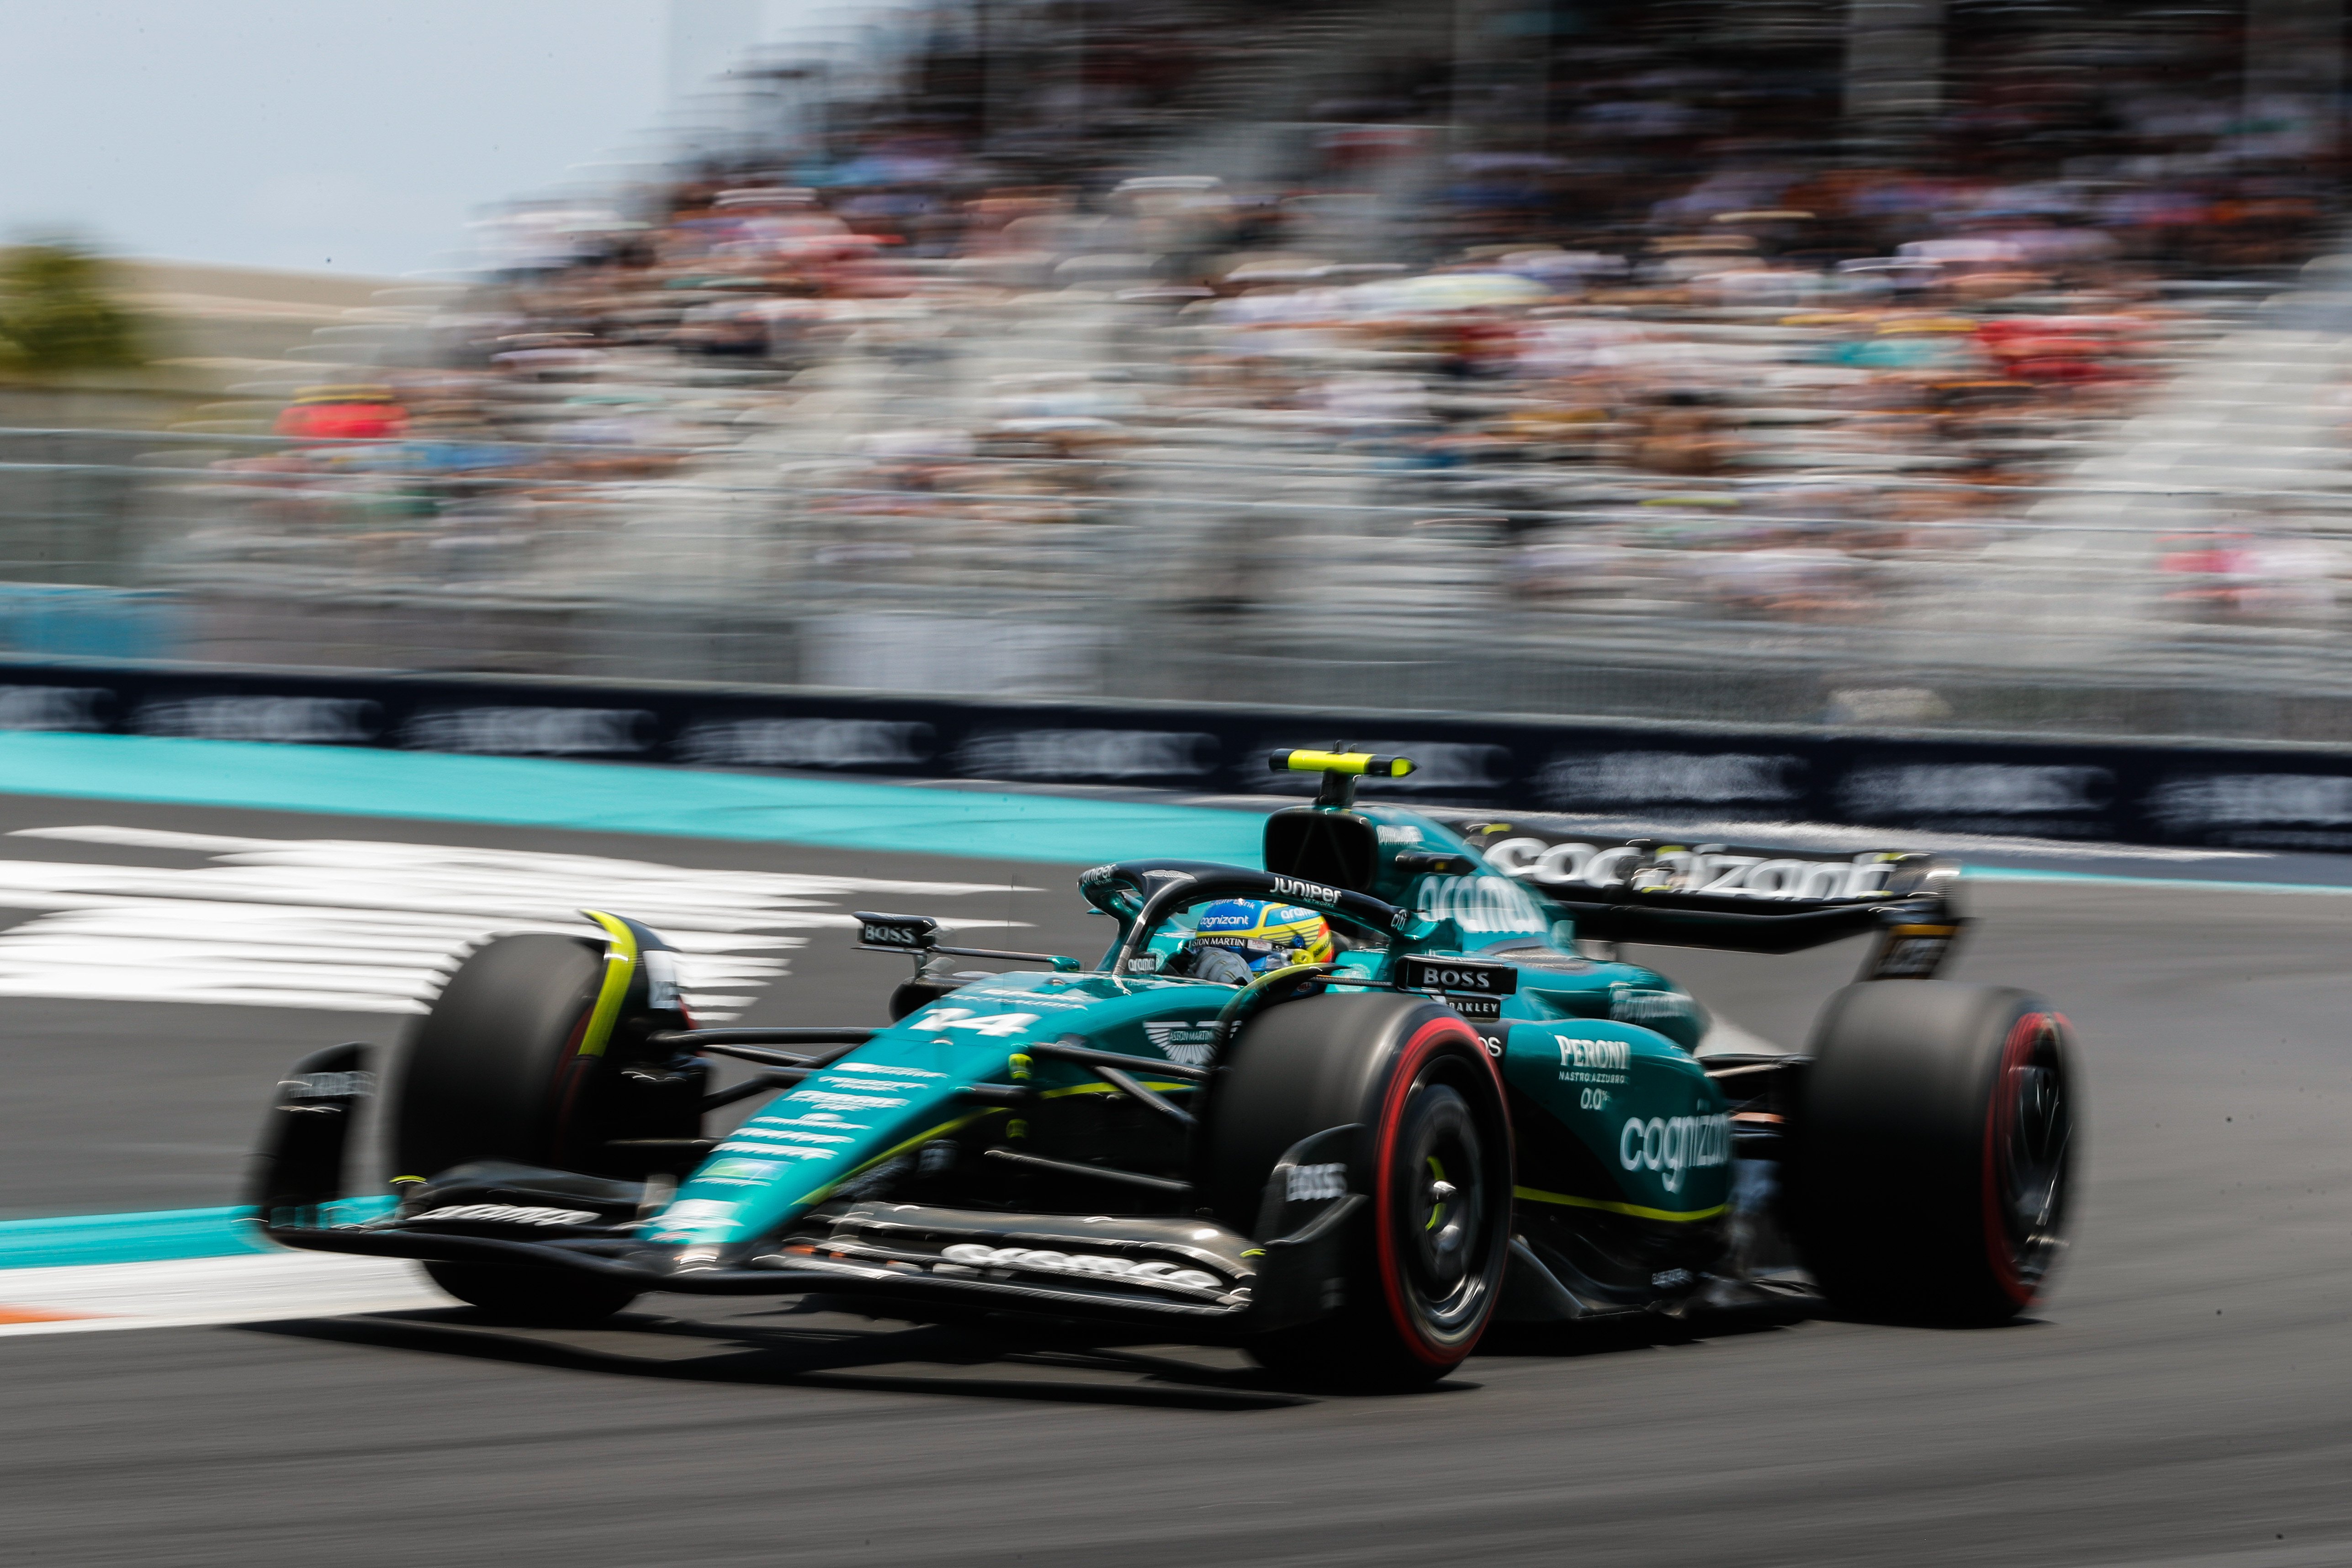 2021 Mercedes financial numbers reflect painful F1 cost cap